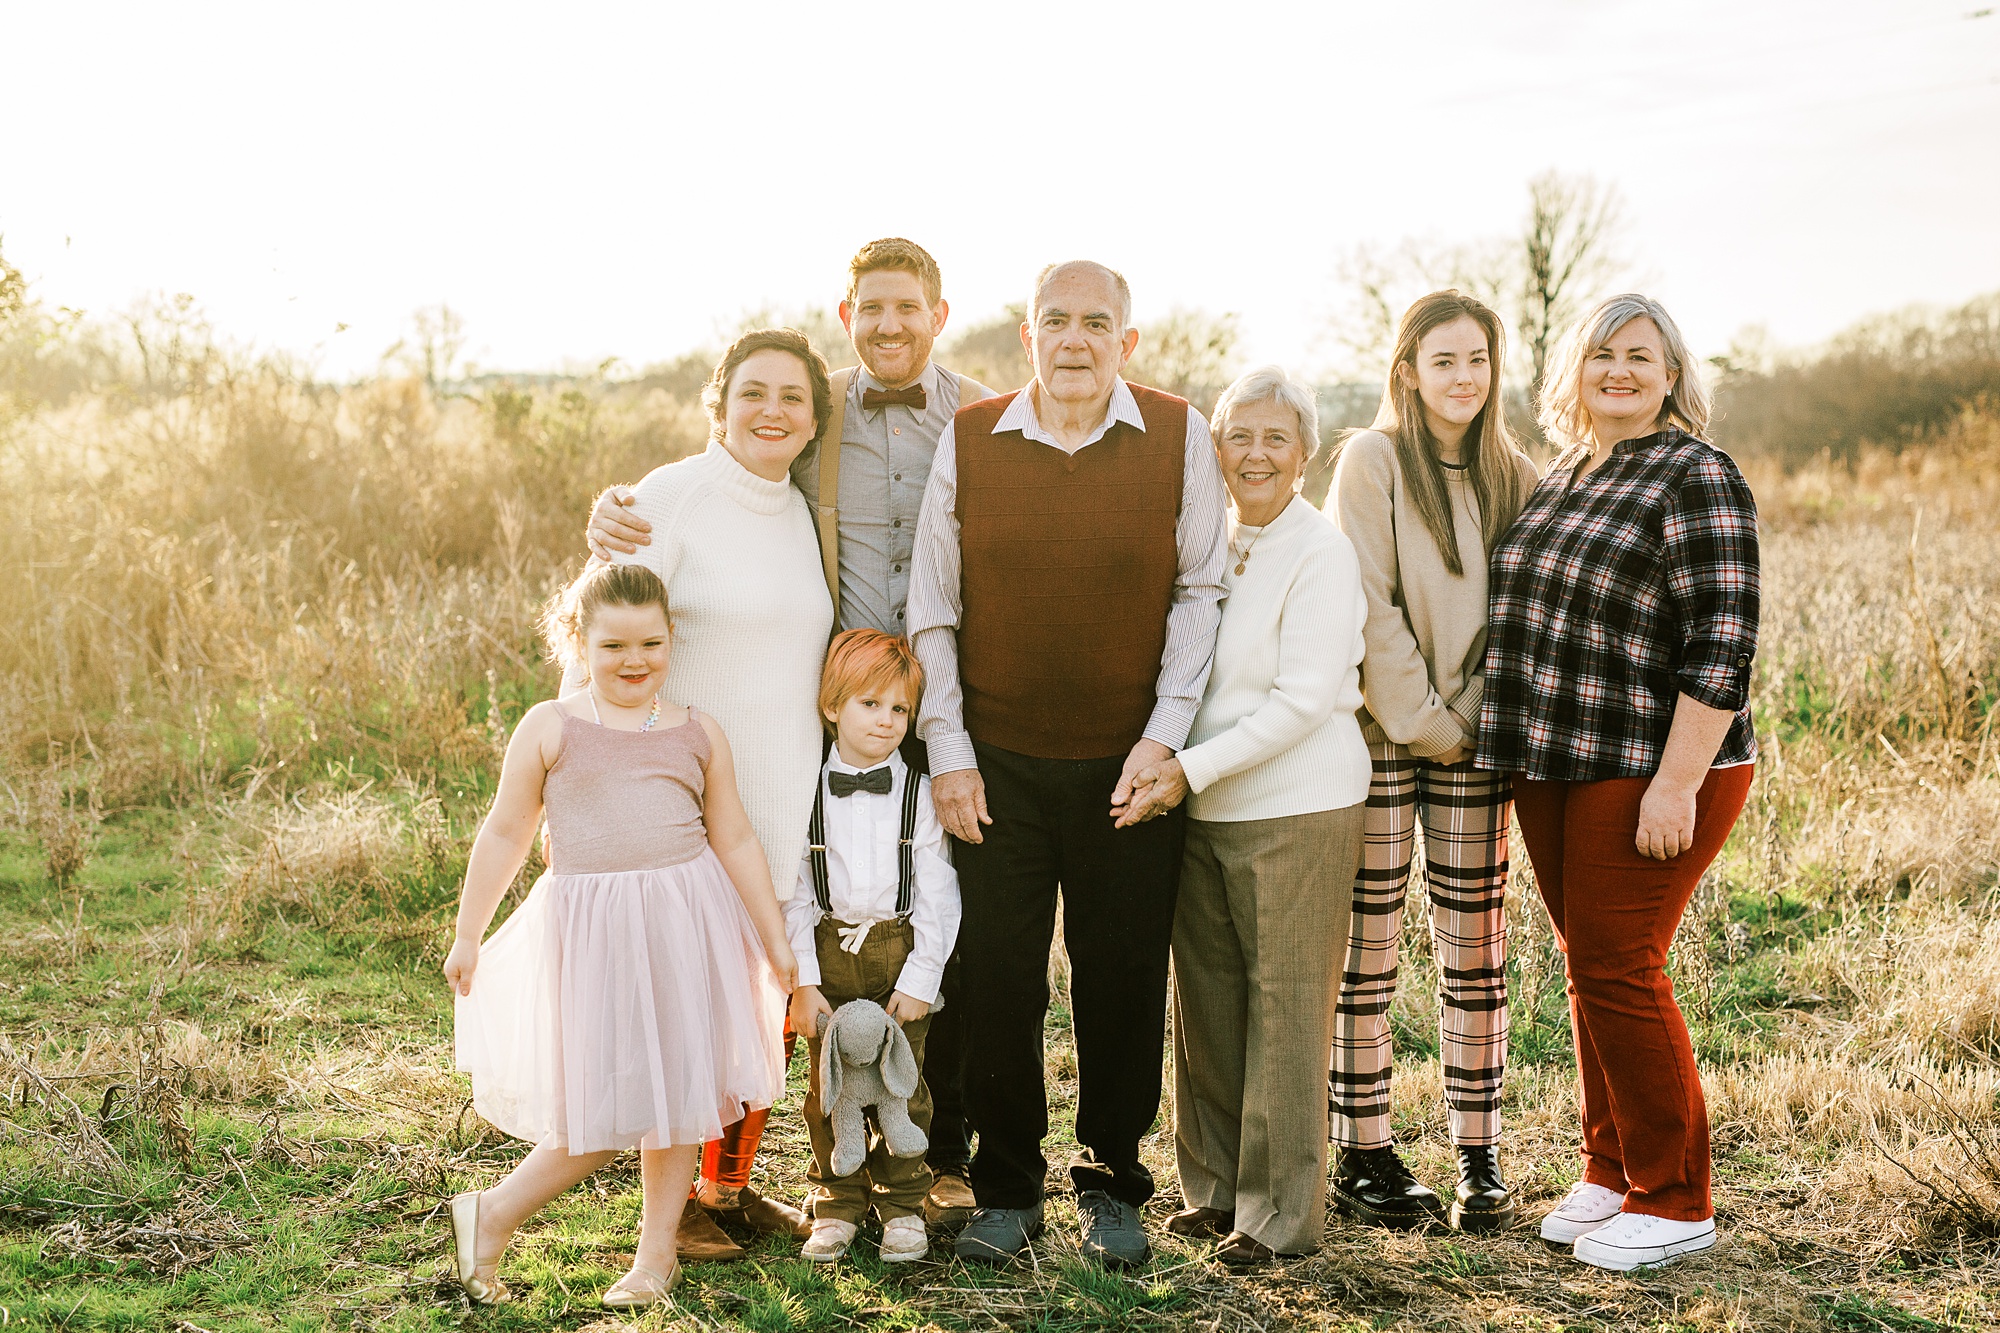 winter family photos to celebrate 50th anniversary